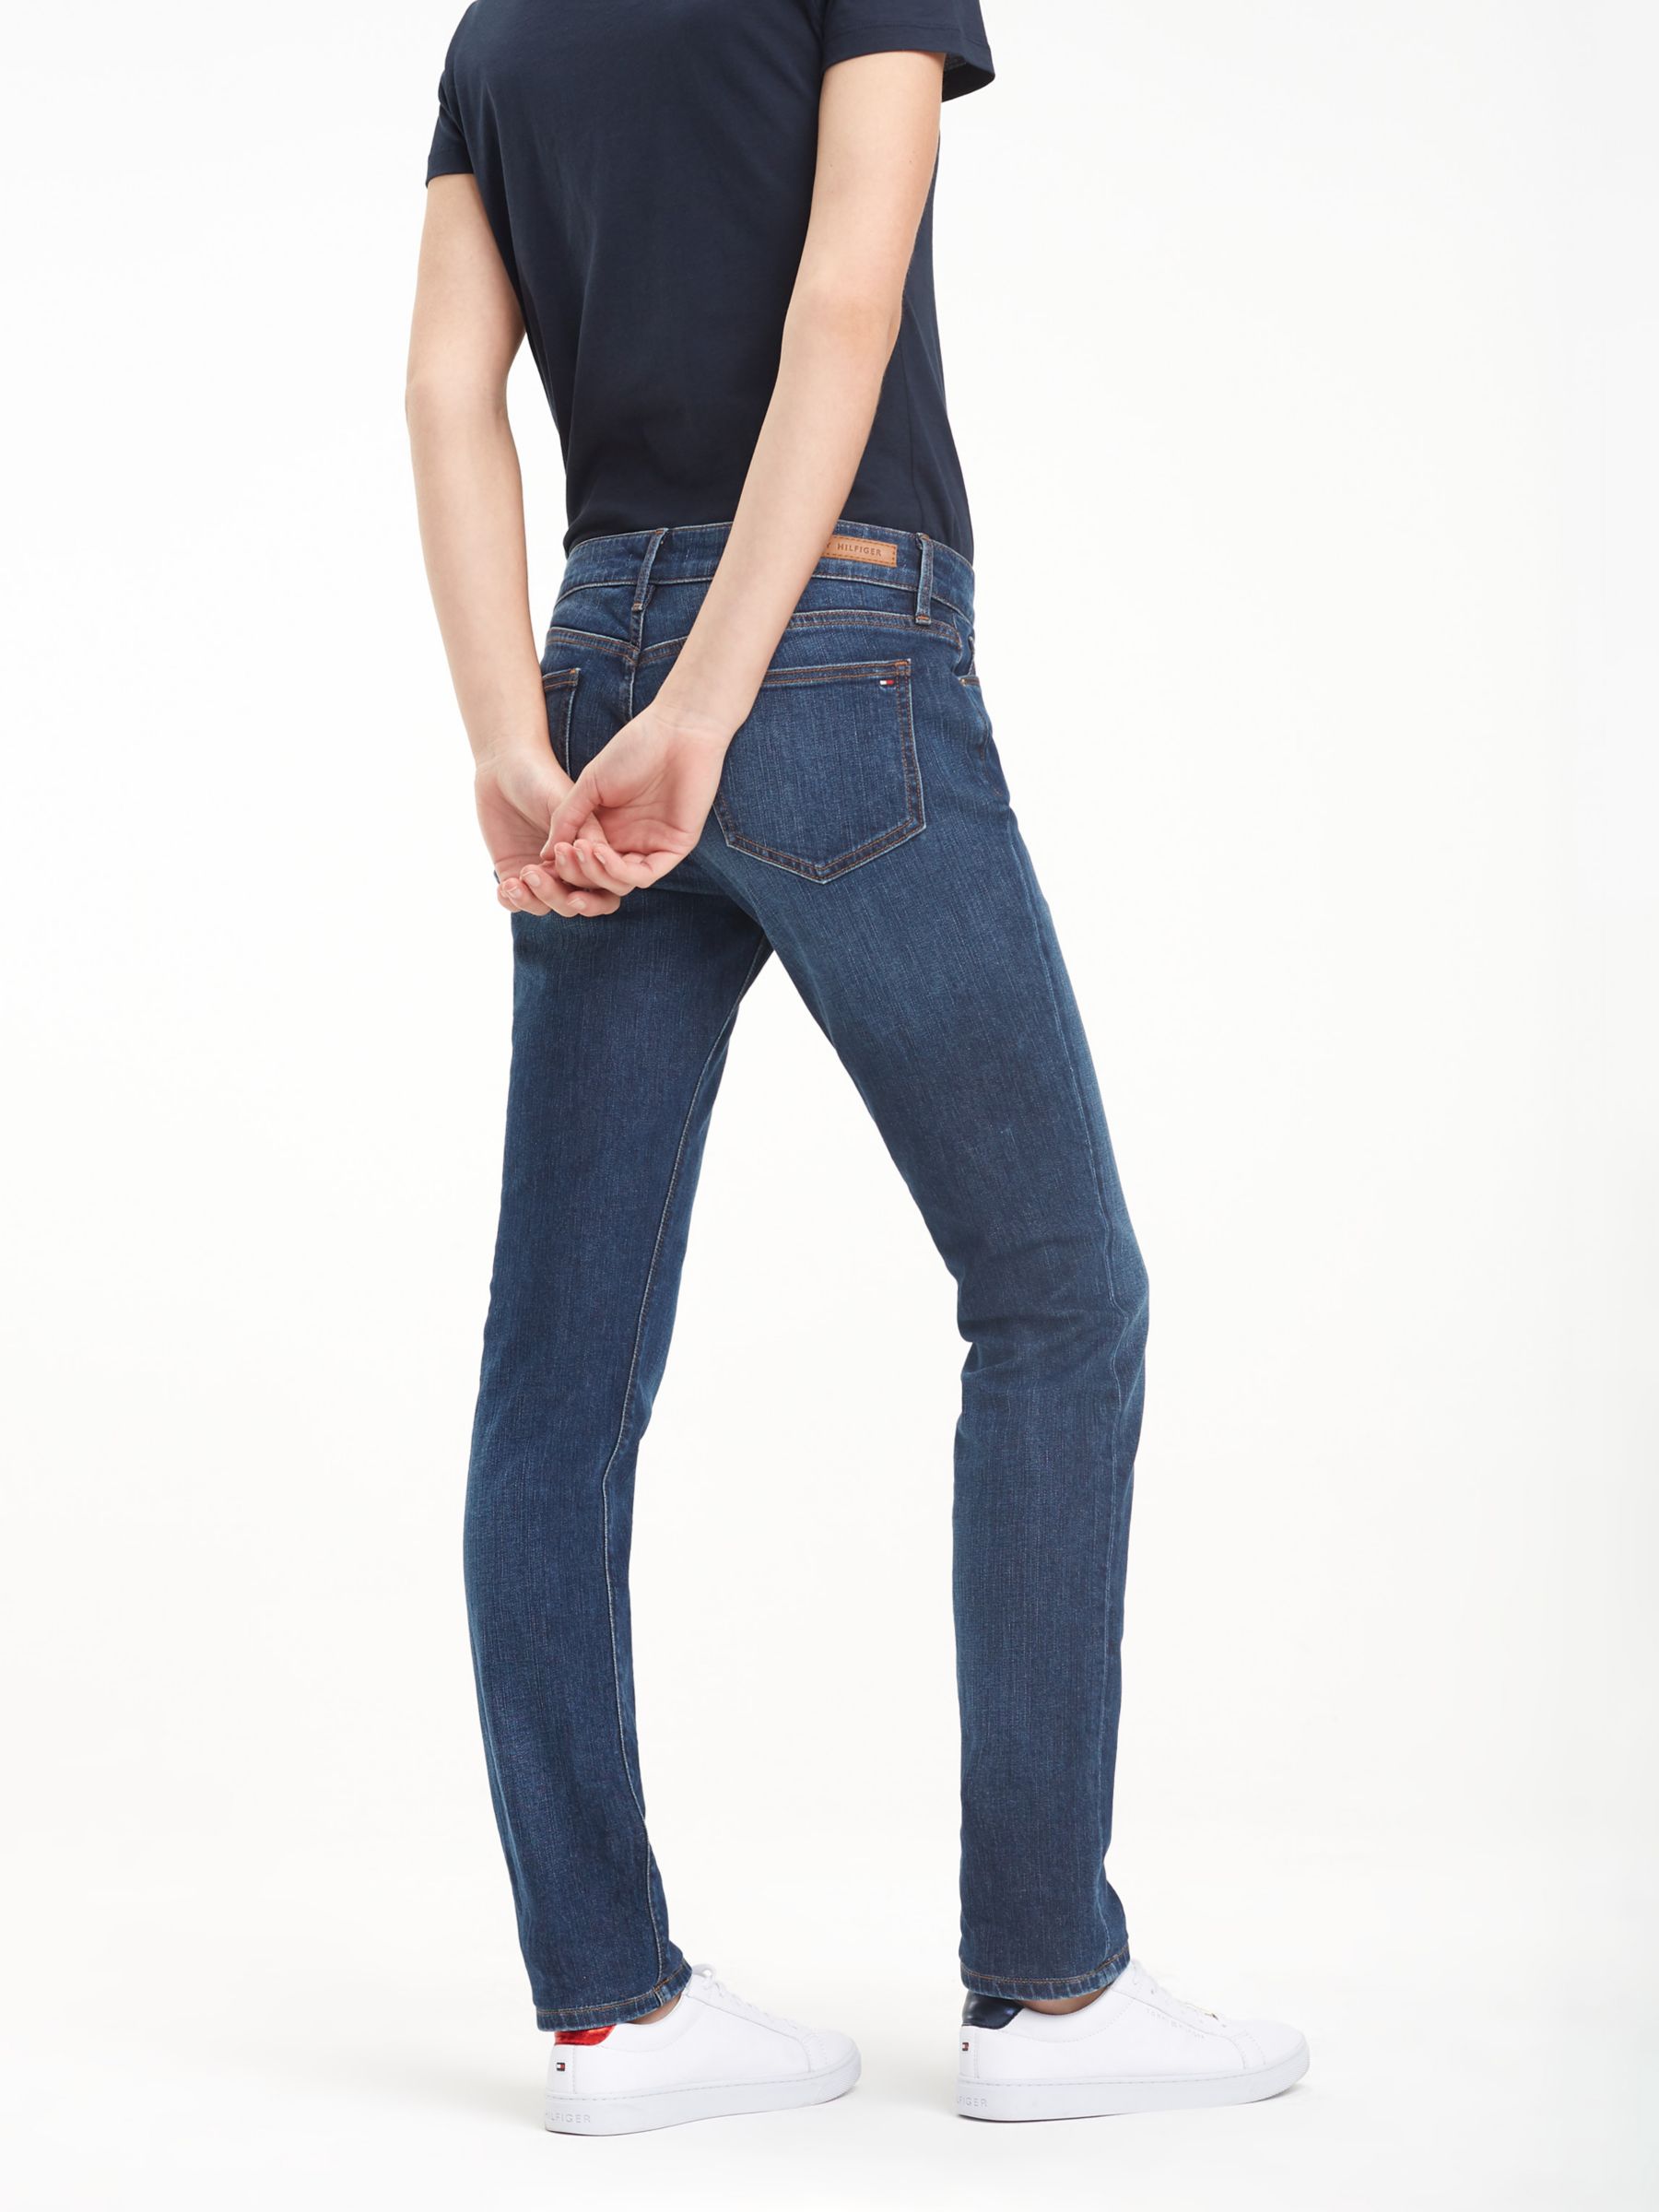 Buy Tommy Hilfiger Straight Fit Jeans, Absolute Blue Wash Online at johnlewis.com